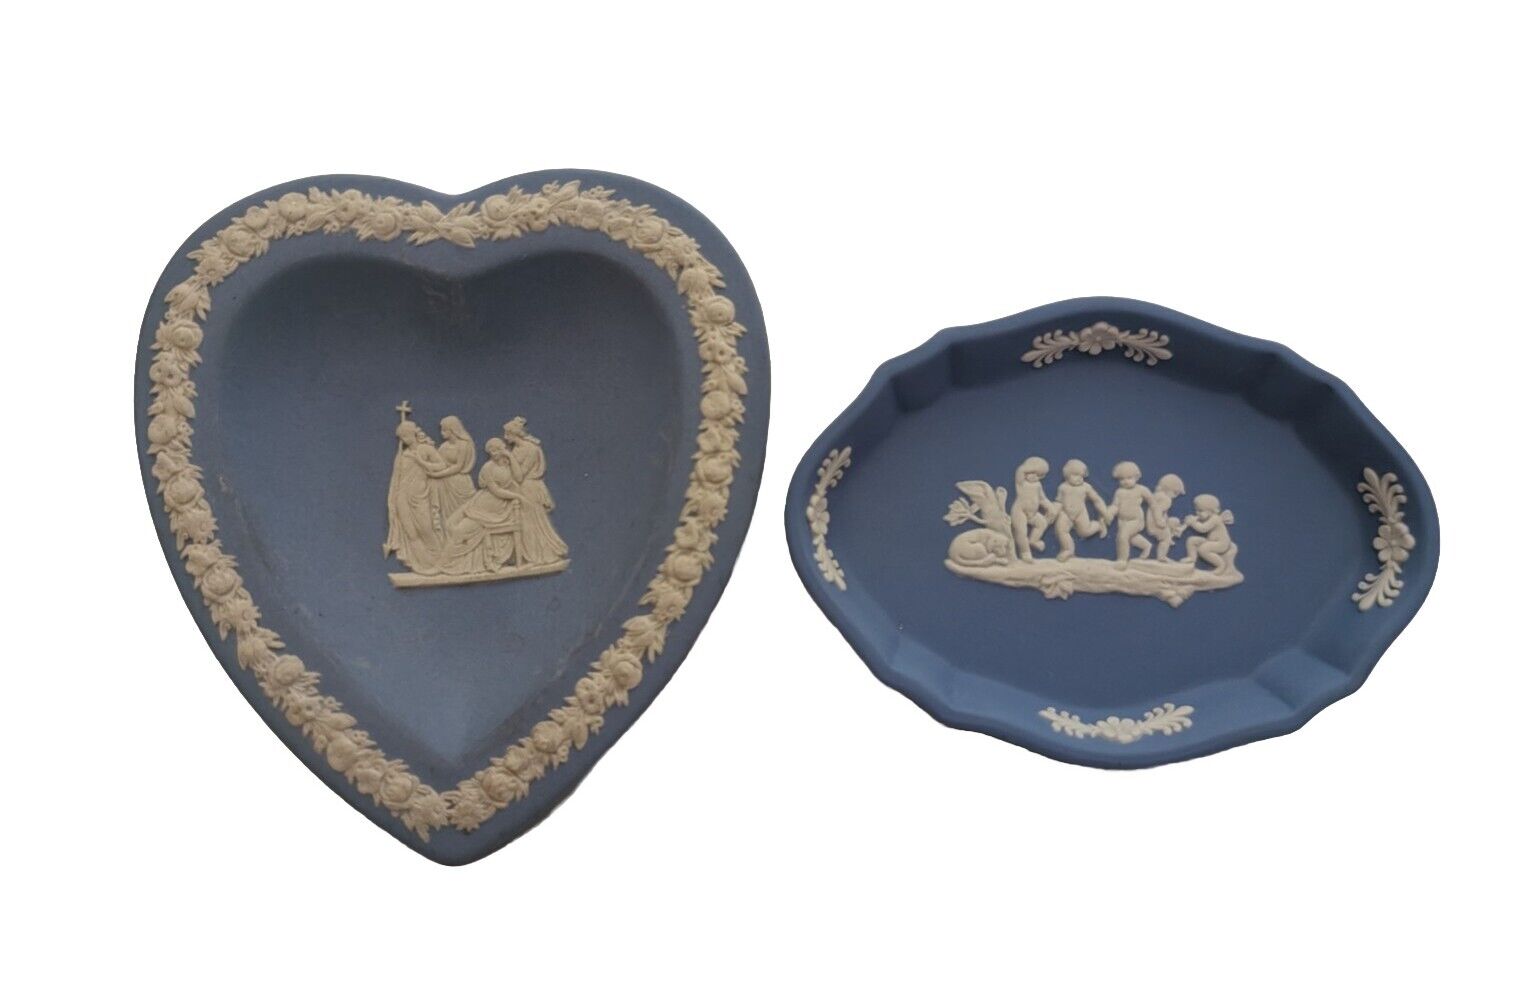 Pair Of 2 Unmatched Wedgwood Blue Jasperware Trinket Dishes 1 Heart 1 Oval Shape